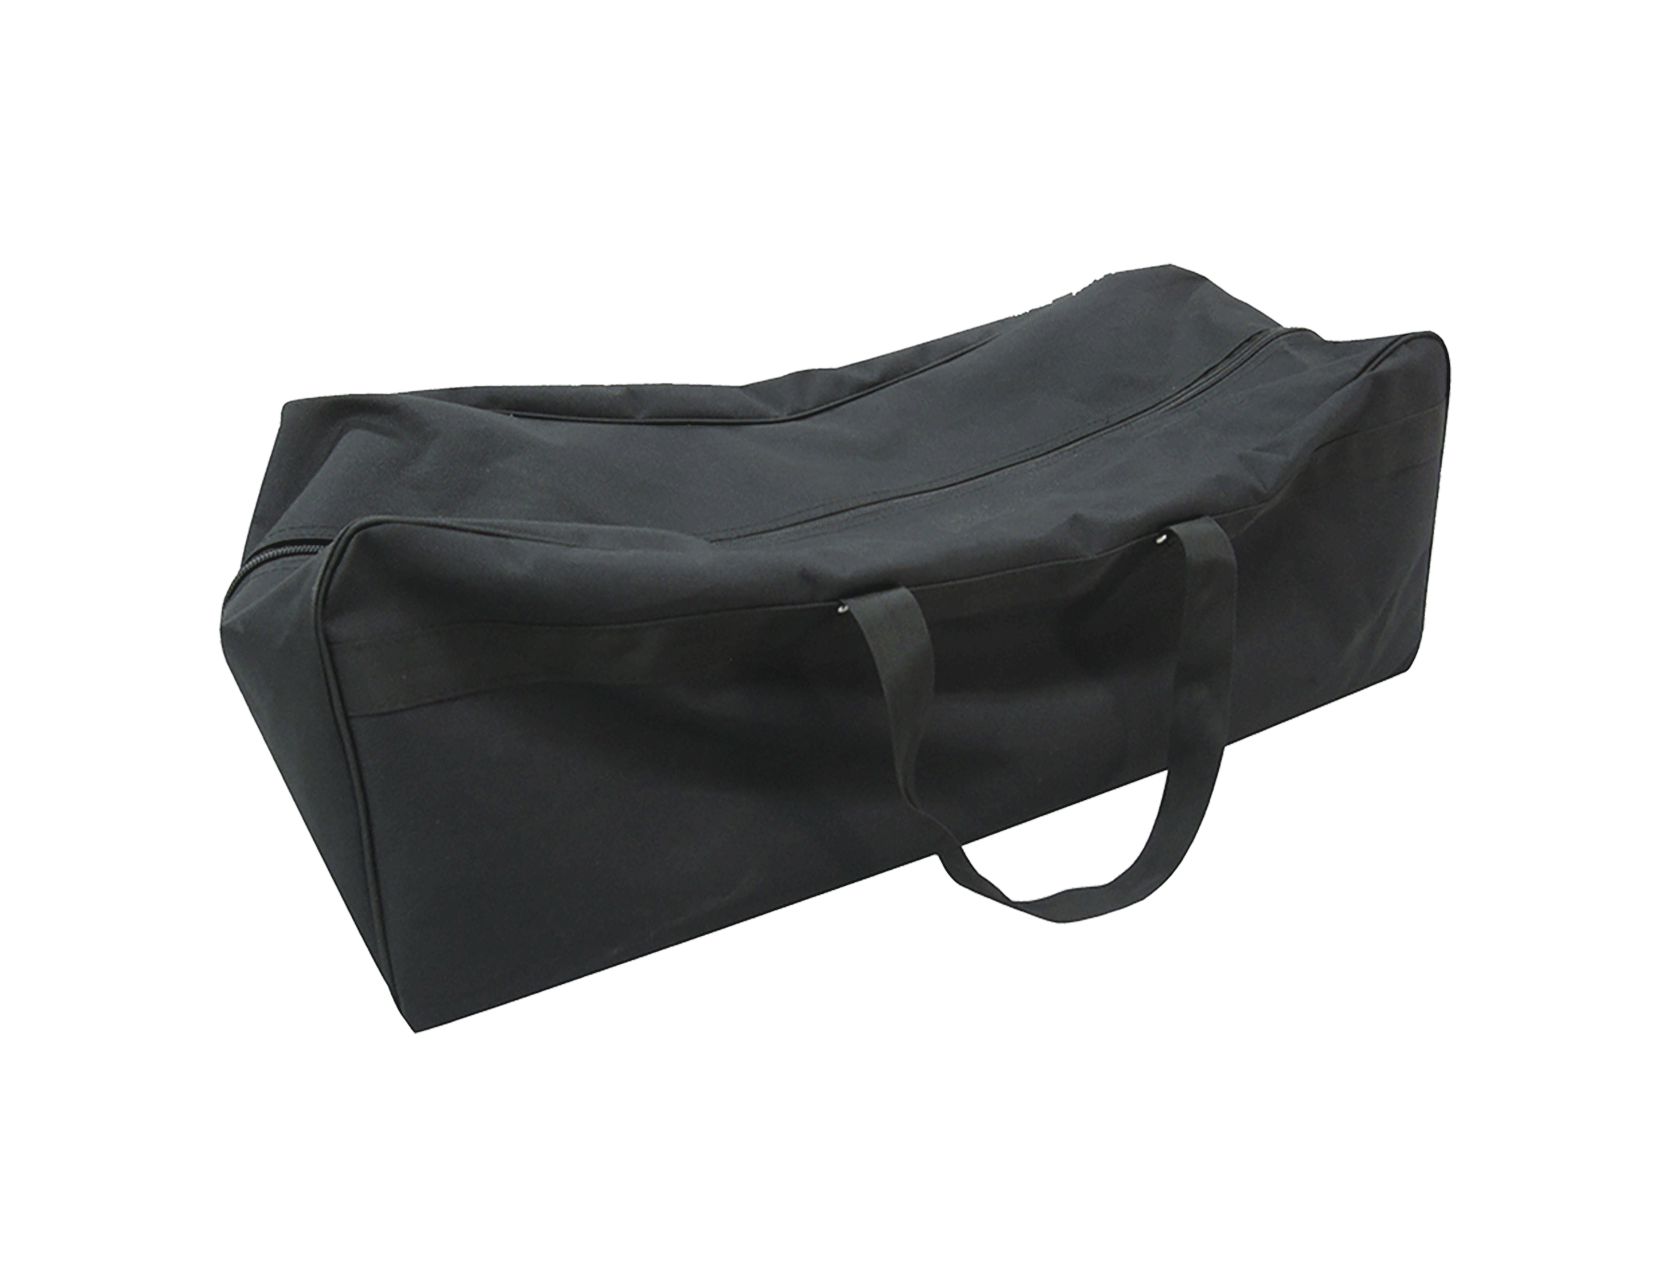 Included carry bag